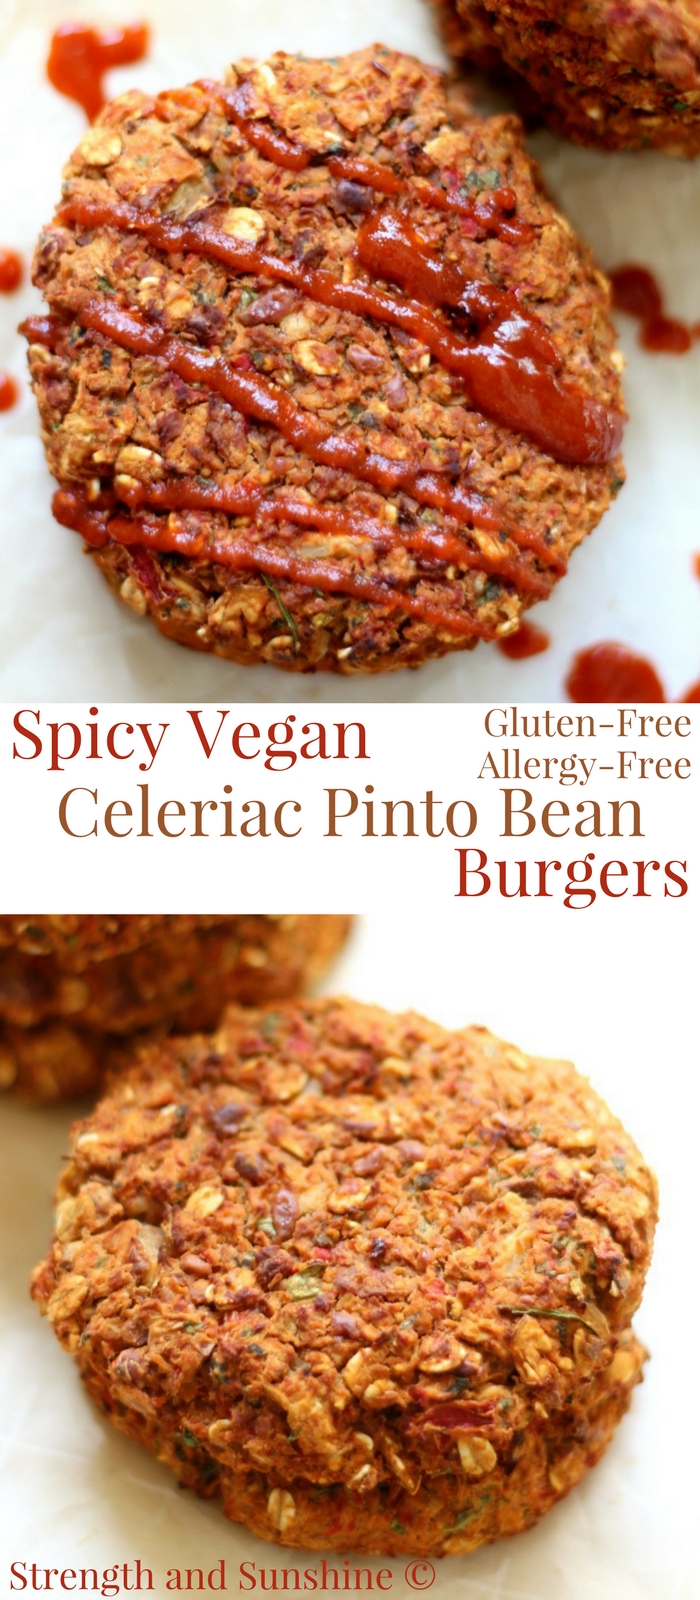 Spicy Vegan Celeriac Pinto Bean Burgers (Gluten-Free, Allergy-Free) | Strength and Sunshine @RebeccaGF666 A hearty meatless burger that will please even the biggest meat-eater! Spicy Vegan Celeriac Pinto Bean Burgers that are gluten-free, top 8 allergy-free, freezable, and won't fall apart! Loaded with smokey chipotle flavor, this healthy veggie burger recipe well be a star at the dinner table! #beanburger #veggieburger #pintobeans #glutenfree #vegan #strengthandsunshine